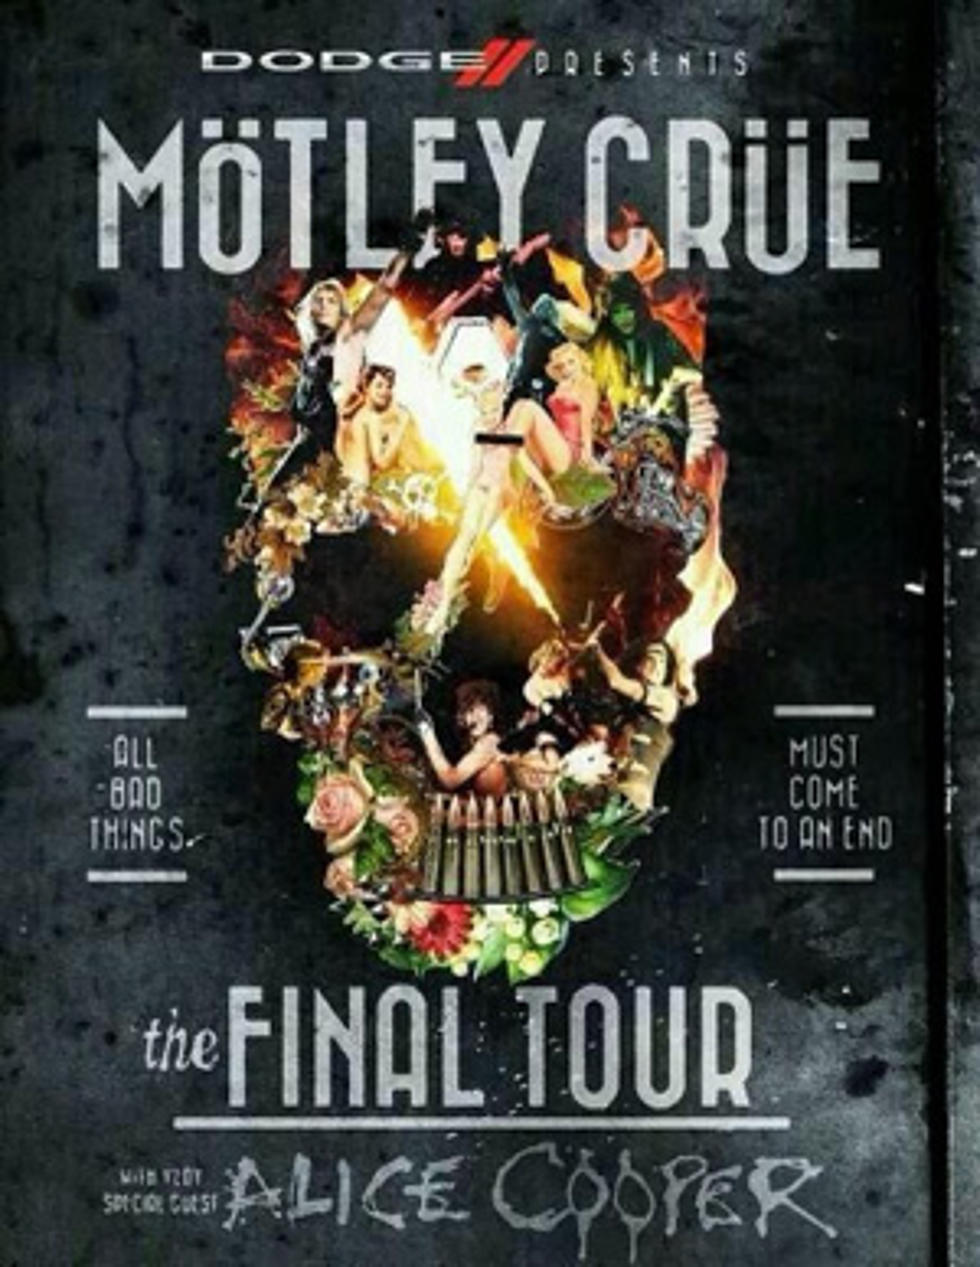 Motley Crue Adds Dates to Final Tour, which Starts July 2 in Grand Rapids